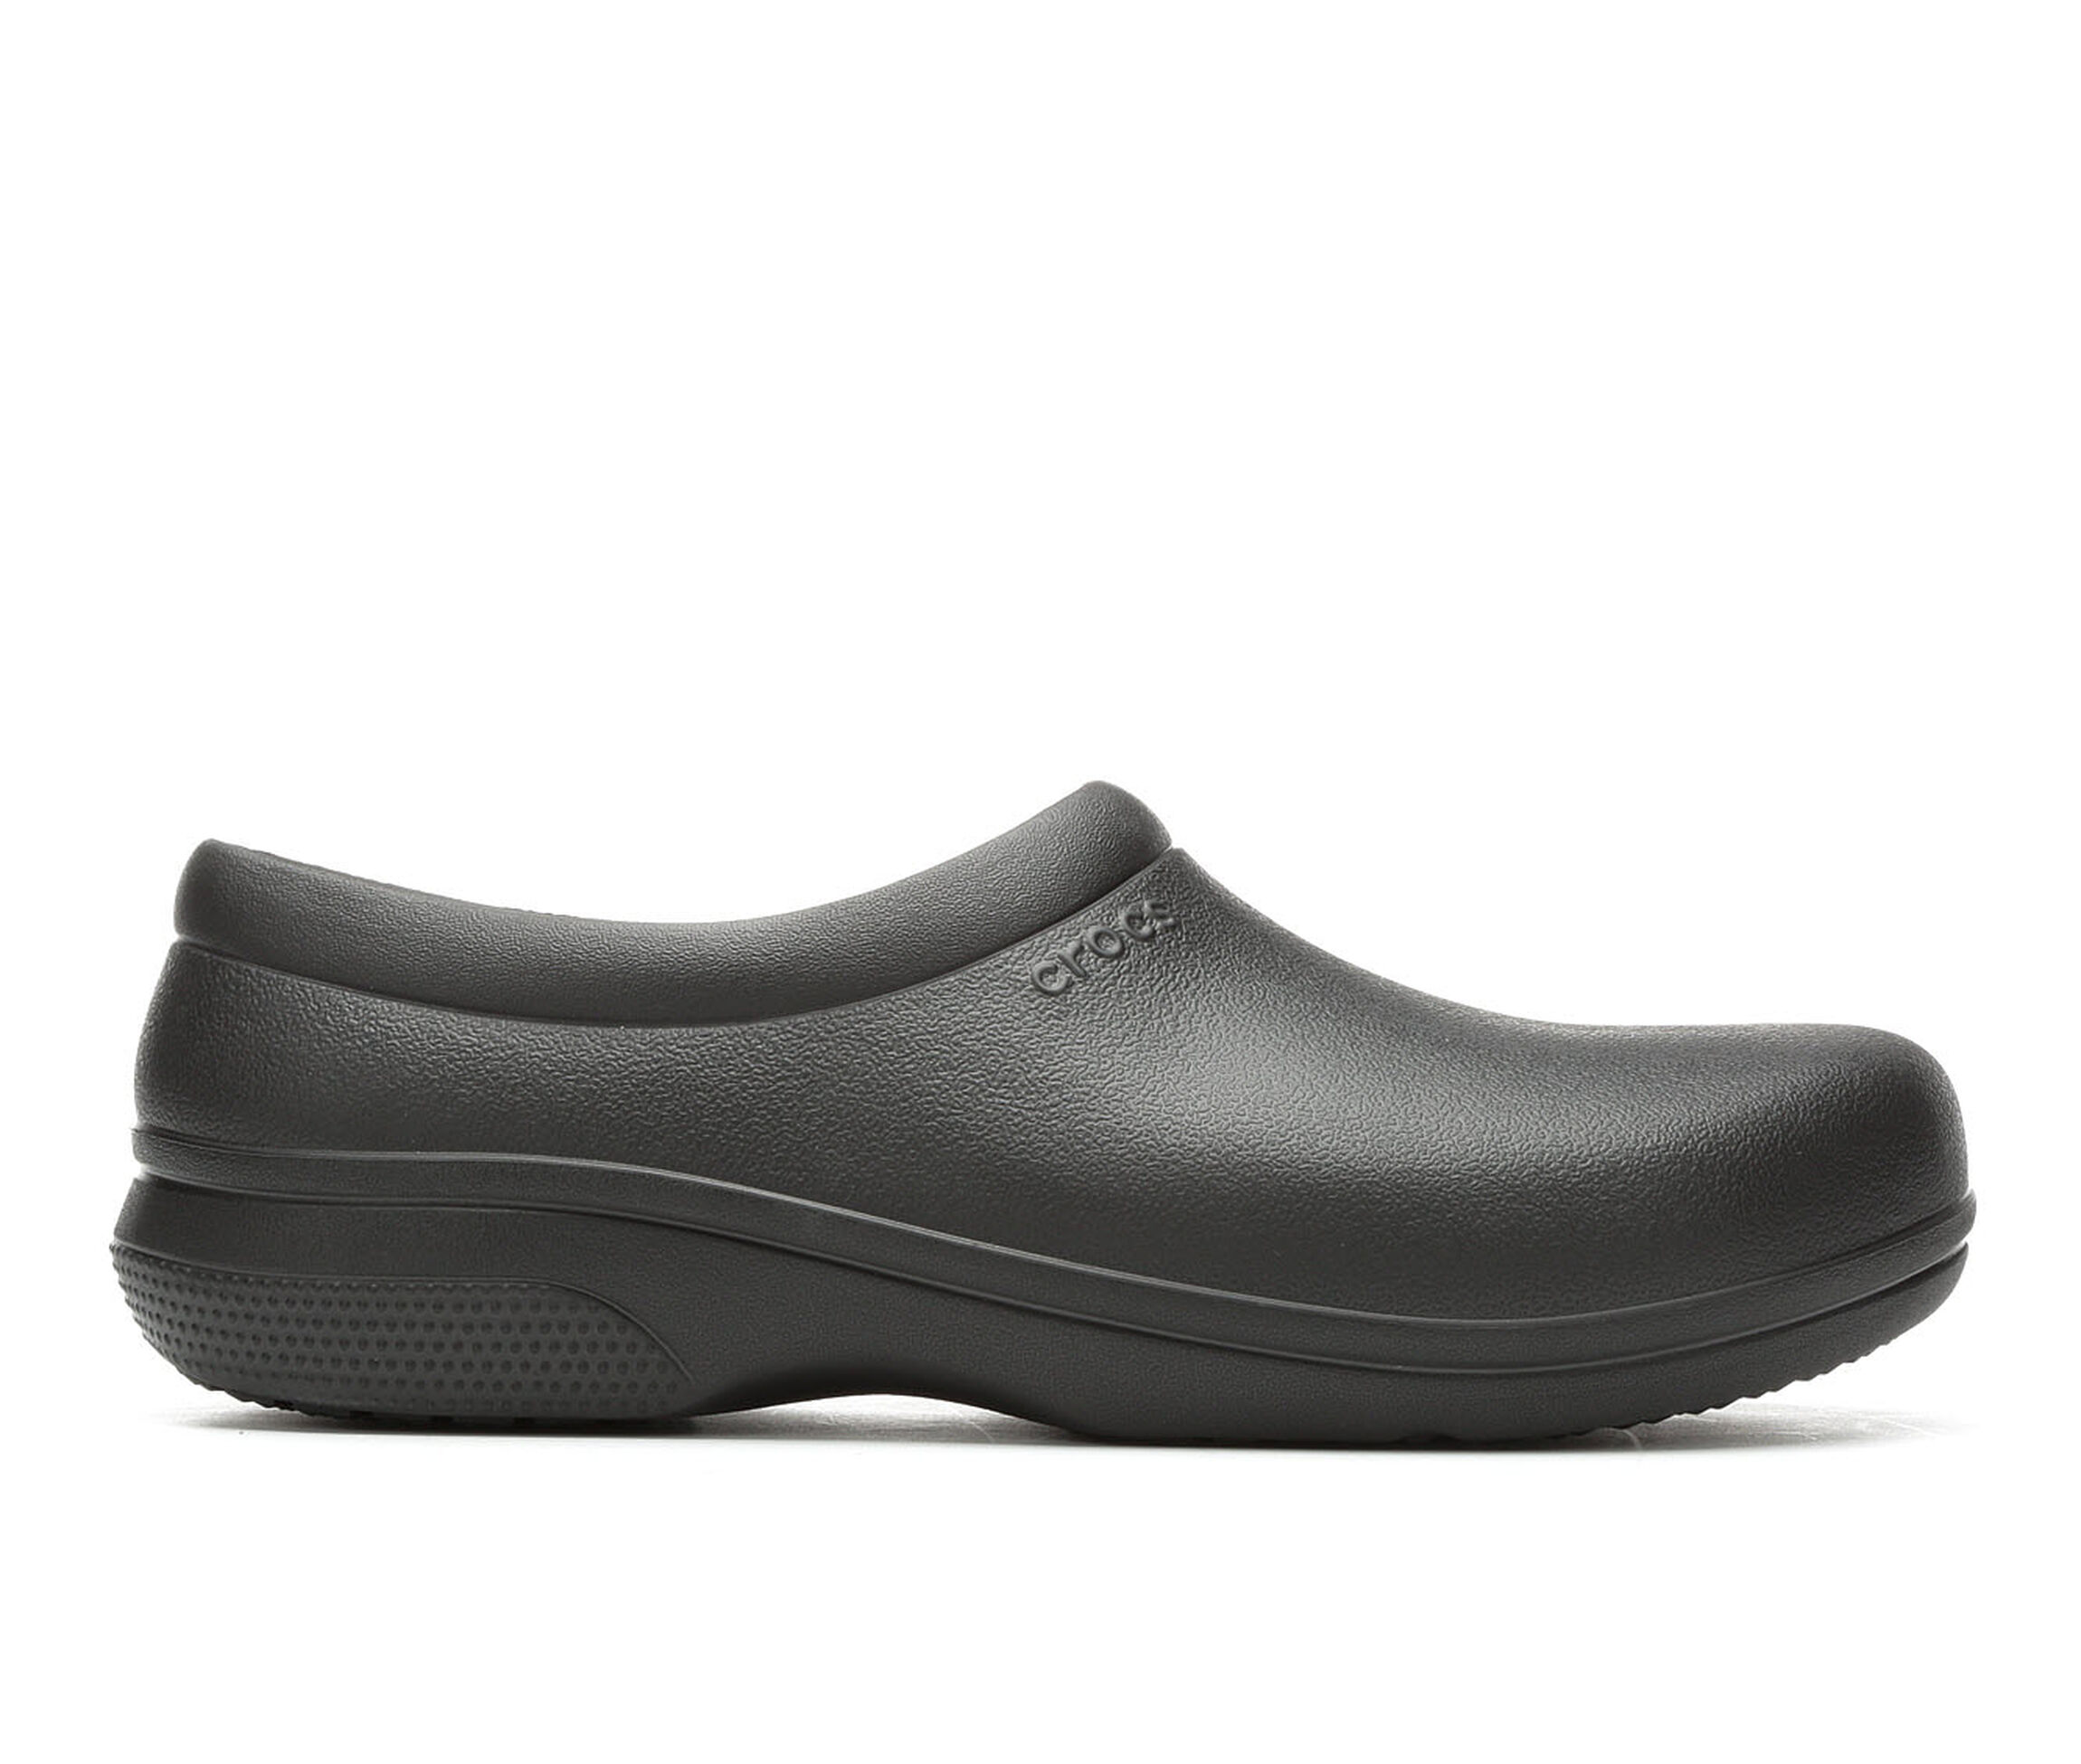 Crocs Work Shoes at Shoe Carnival | Non-Slip Work Shoes